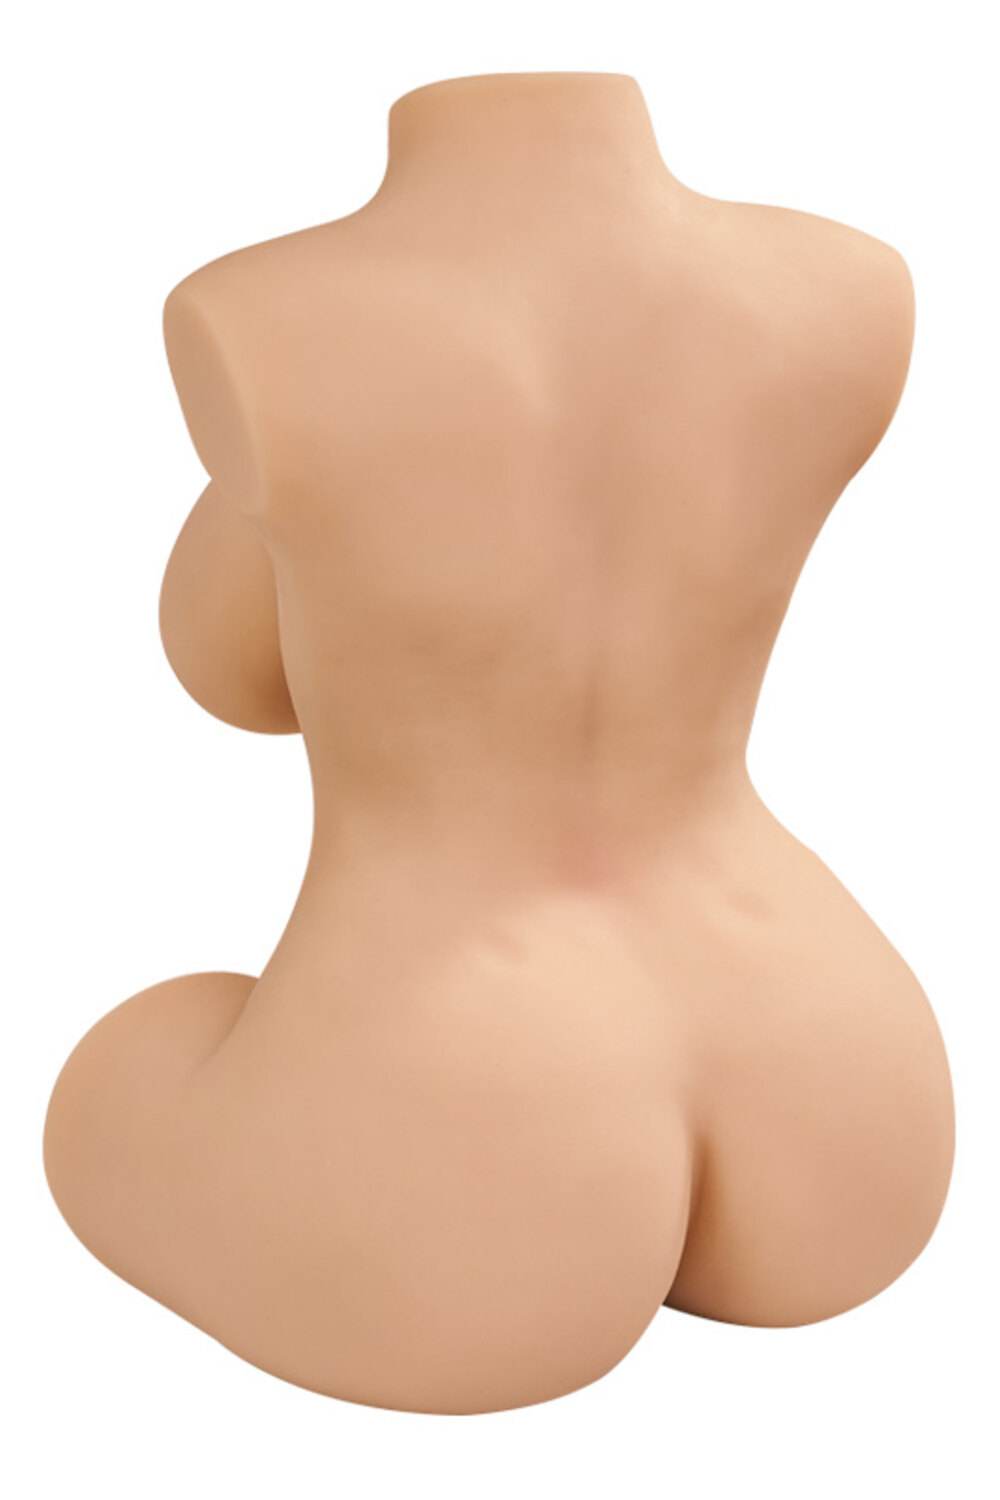 Mara Pretty 48.5cm(1ft7) G-Cup Tantaly Sex Real Doll (In Stock) image5